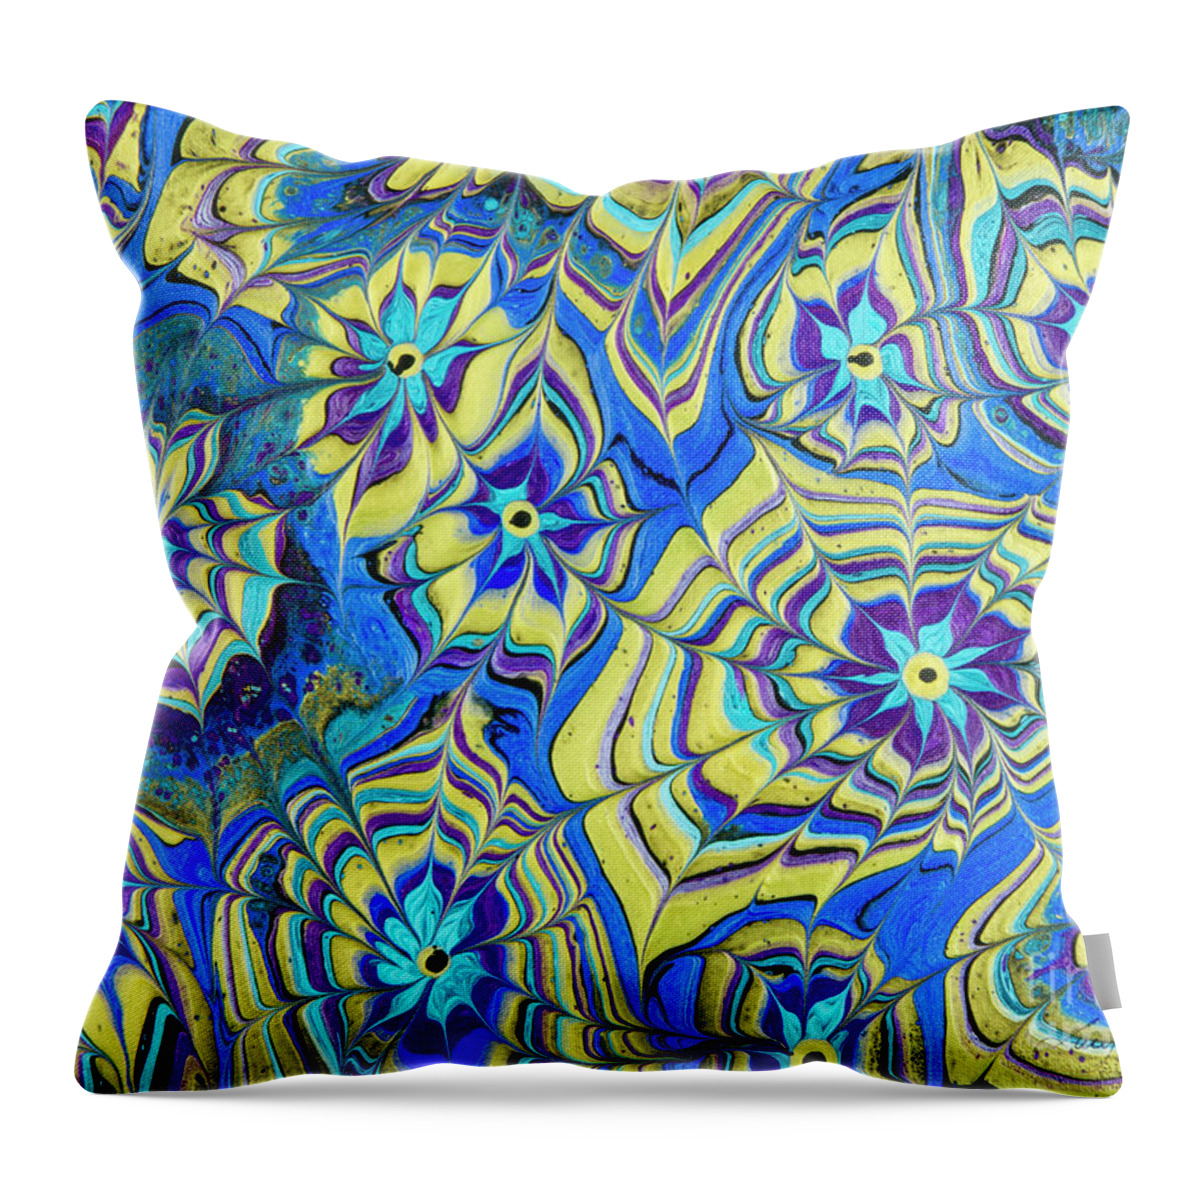 Poured Acrylics Throw Pillow featuring the painting Mutliverse Web by Lucy Arnold